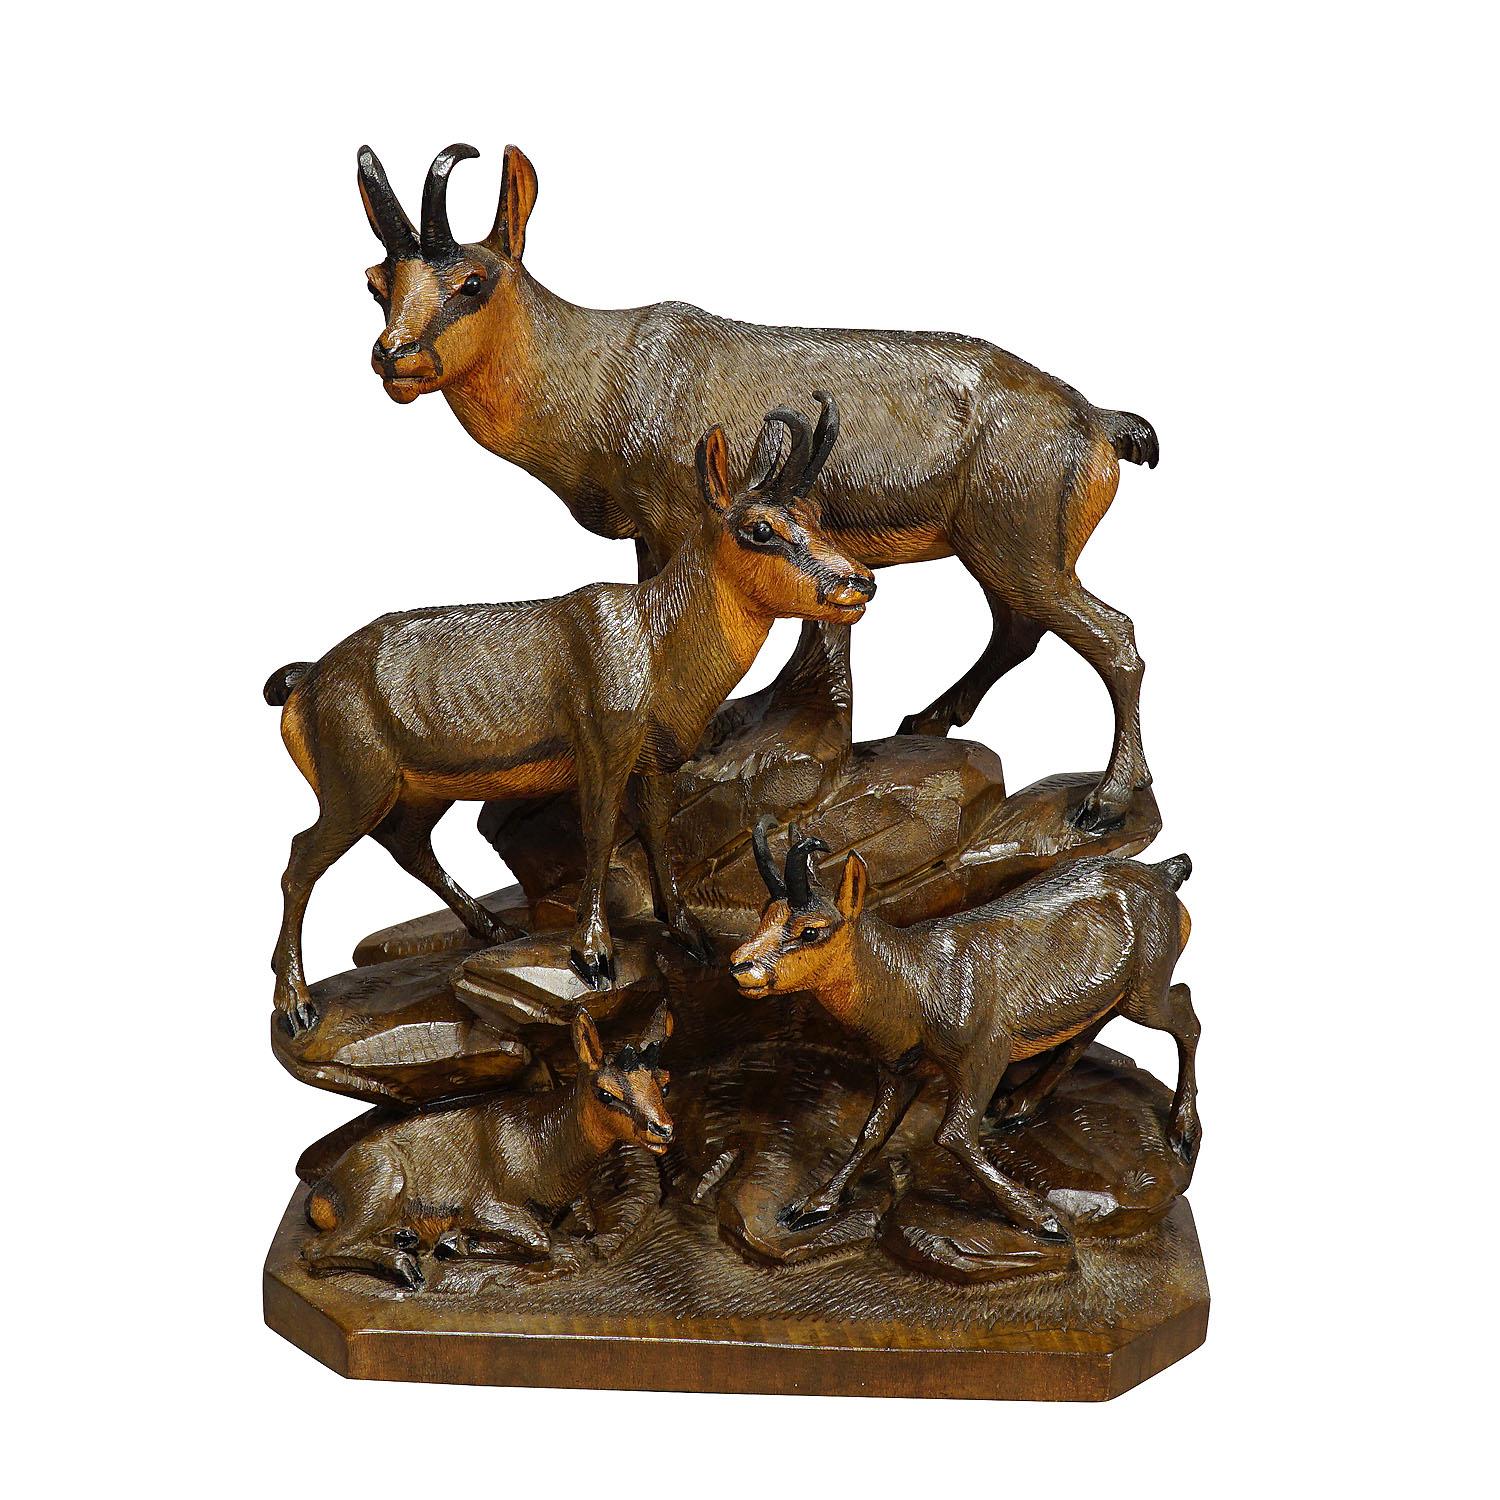 A handcarved wooden sculpture of a chamois group with buck, chamois and fawn. A very fine and natural carving by the Austrian woodcarver Ernst Heissl, ca. 1900.

Measures: width: 7.87